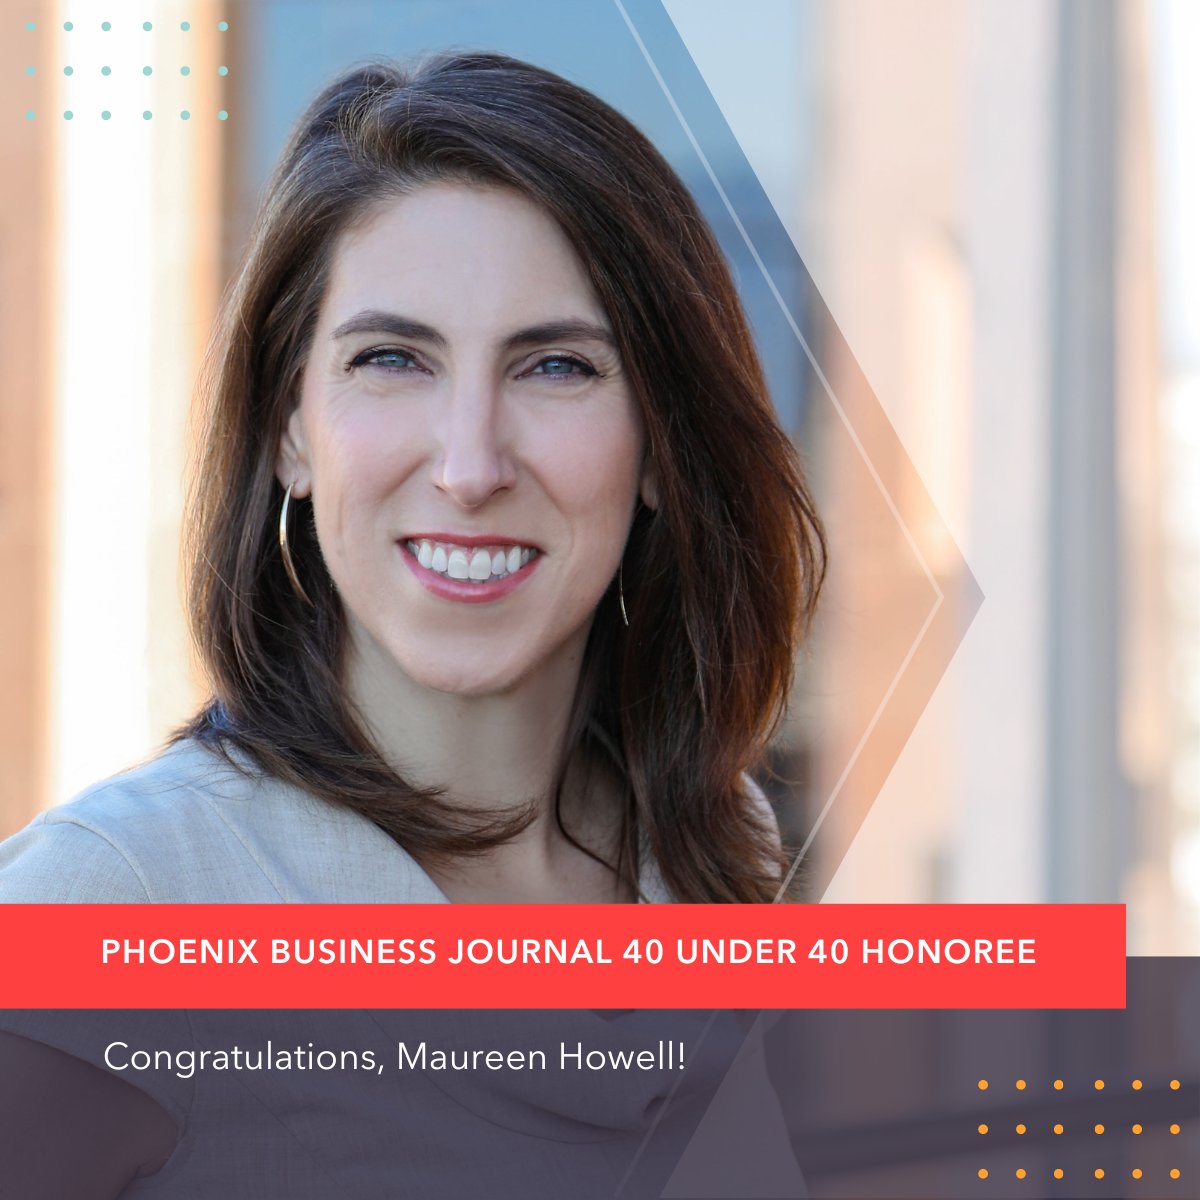 Congratulations to Chief of Staff Maureen Howell for being named a @phxbizjournal 40 Under 40 honoree! 🎉 We're so lucky to have such a dedicated and forward-thinking individual propelling the team to advance our mission & organization. bizjournals.com/phoenix/news/2…